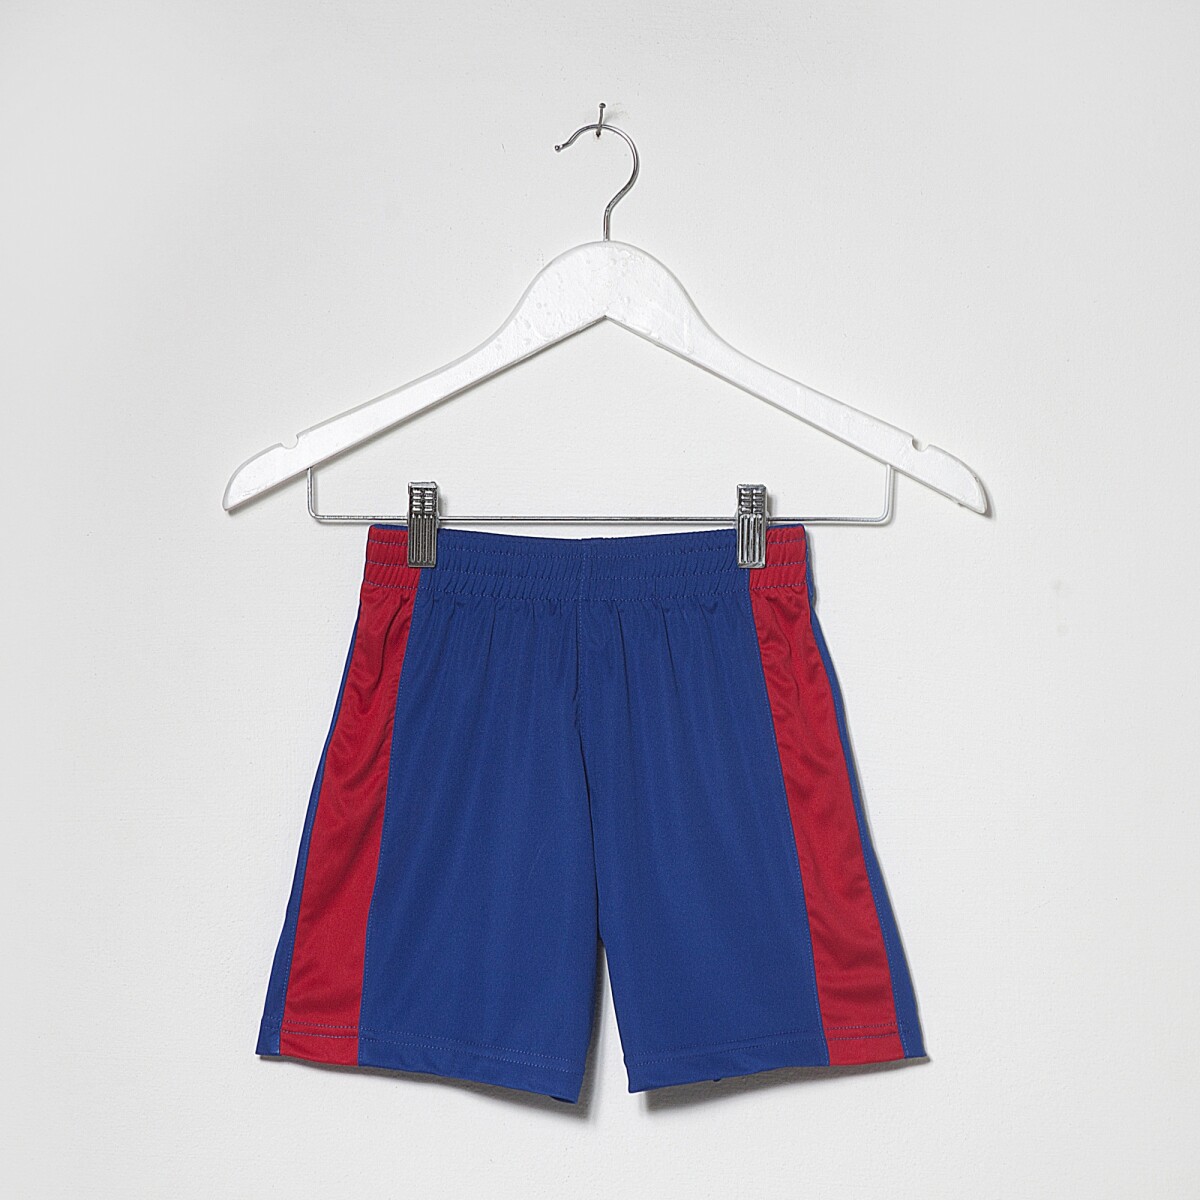 Short deportivo The Anglo School - Blue 